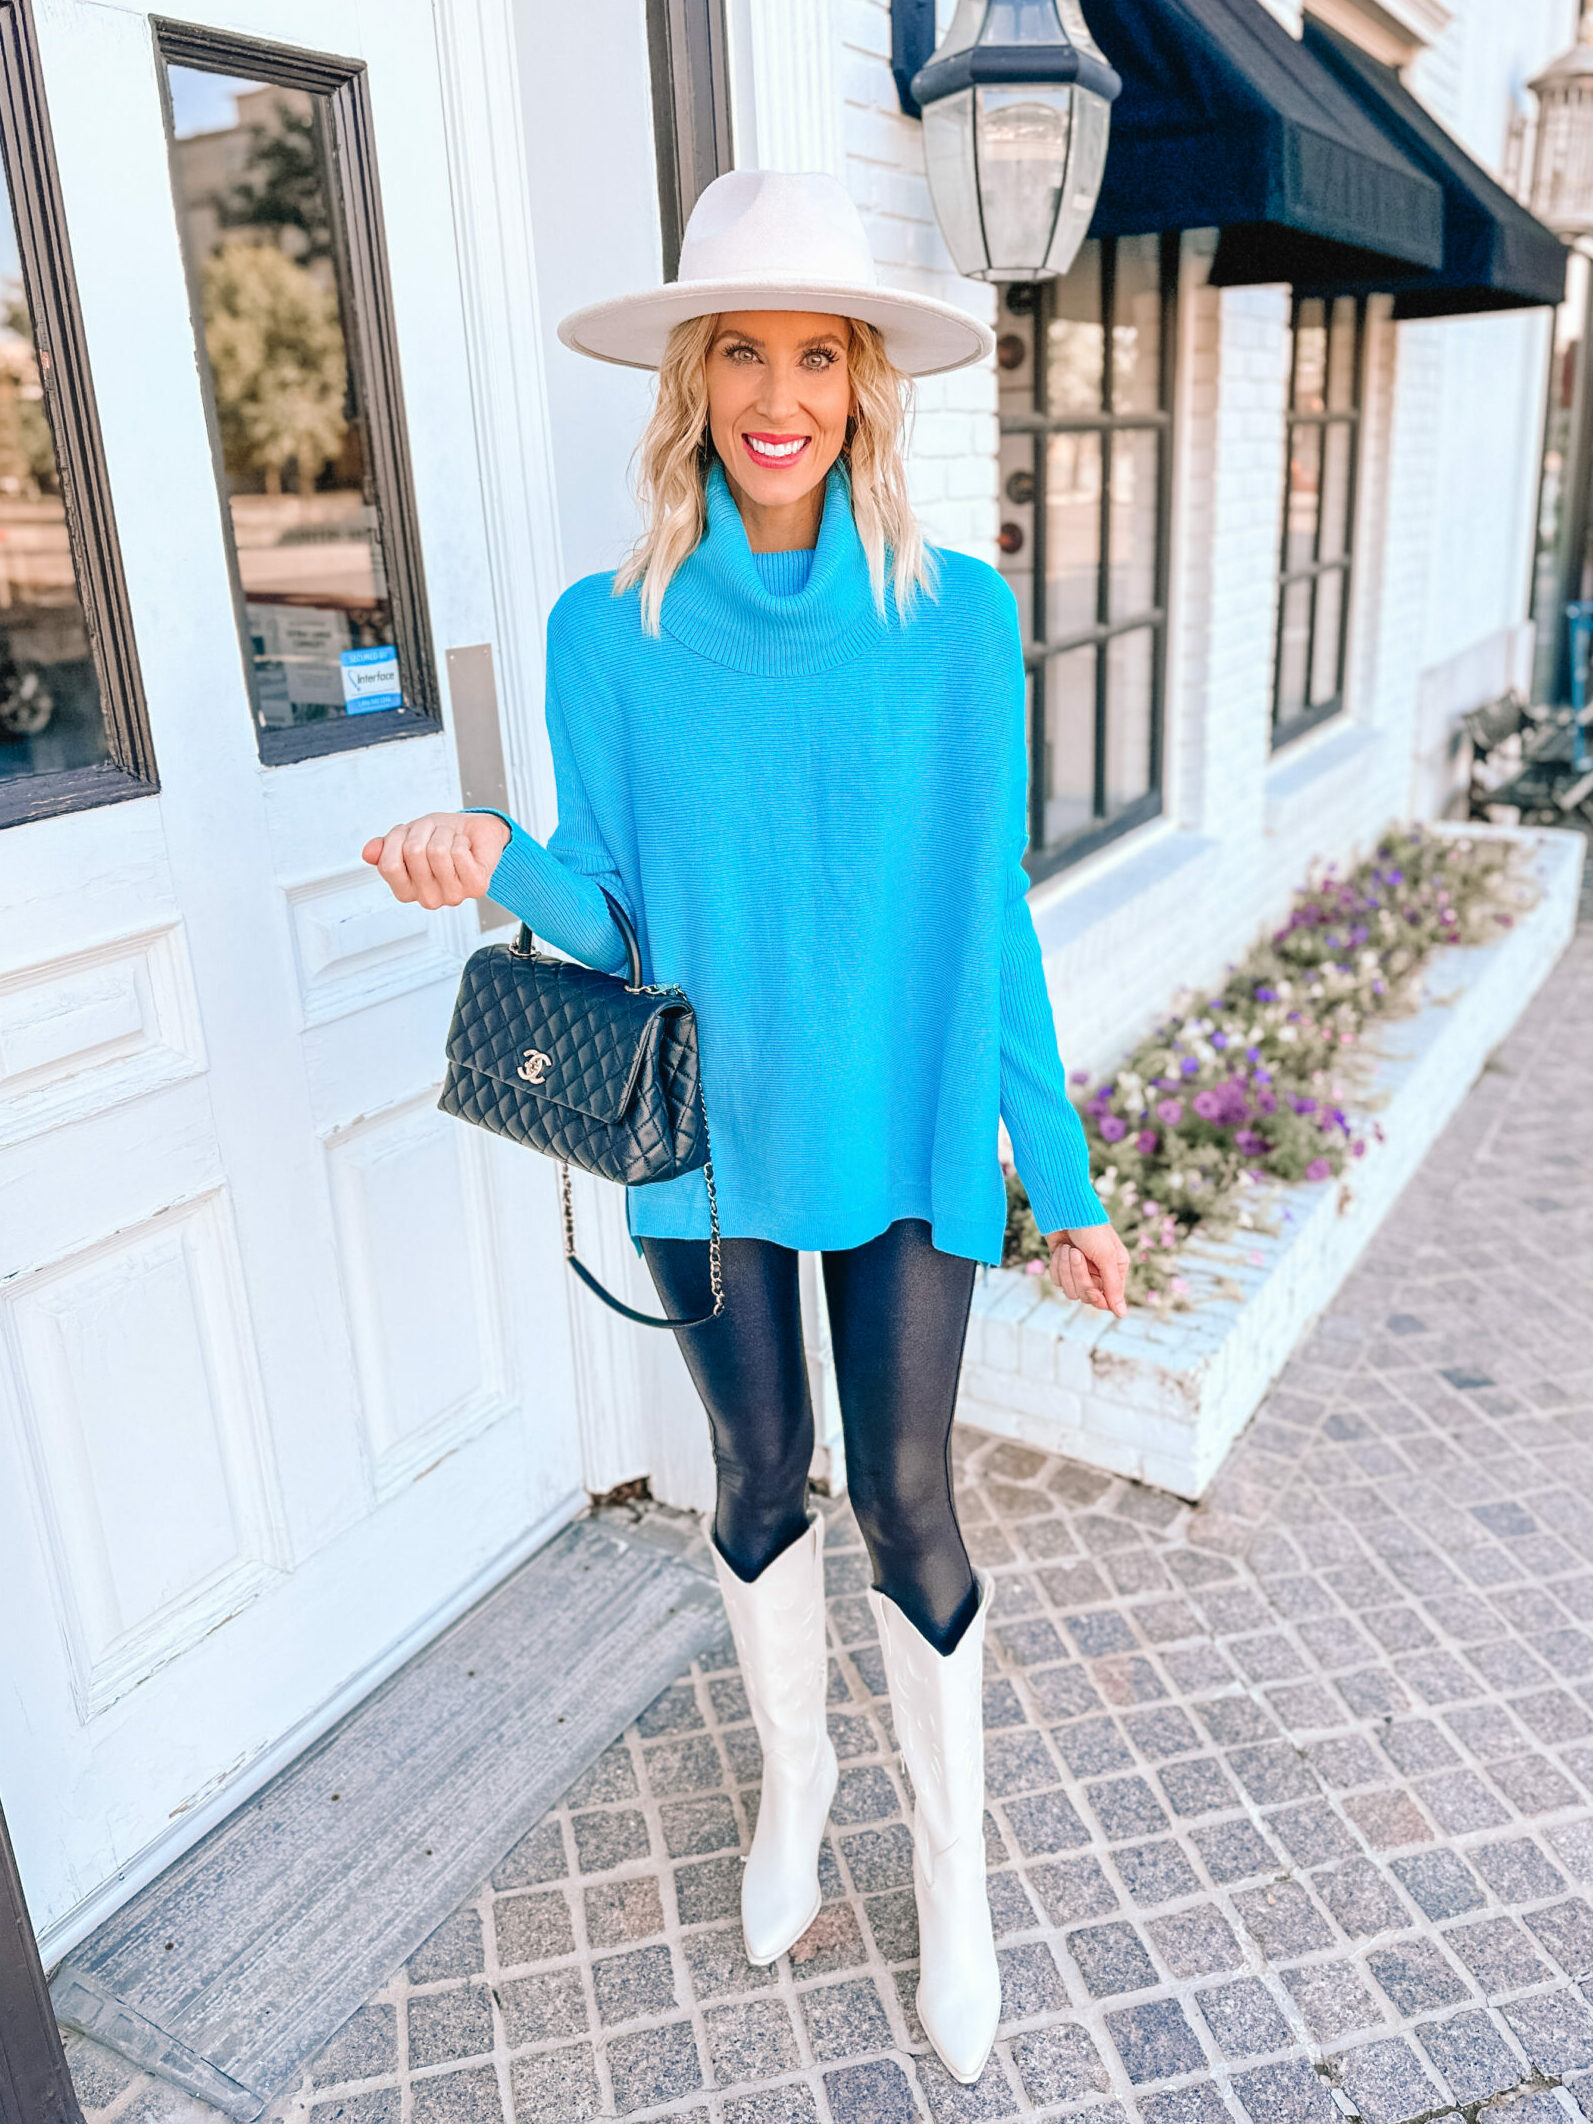 Who doesn't love a legging friendly sweater?! Rounding up my favorite Amazon tunic length sweaters today since it is finally feeling like fall! You'll love this bright blue option!